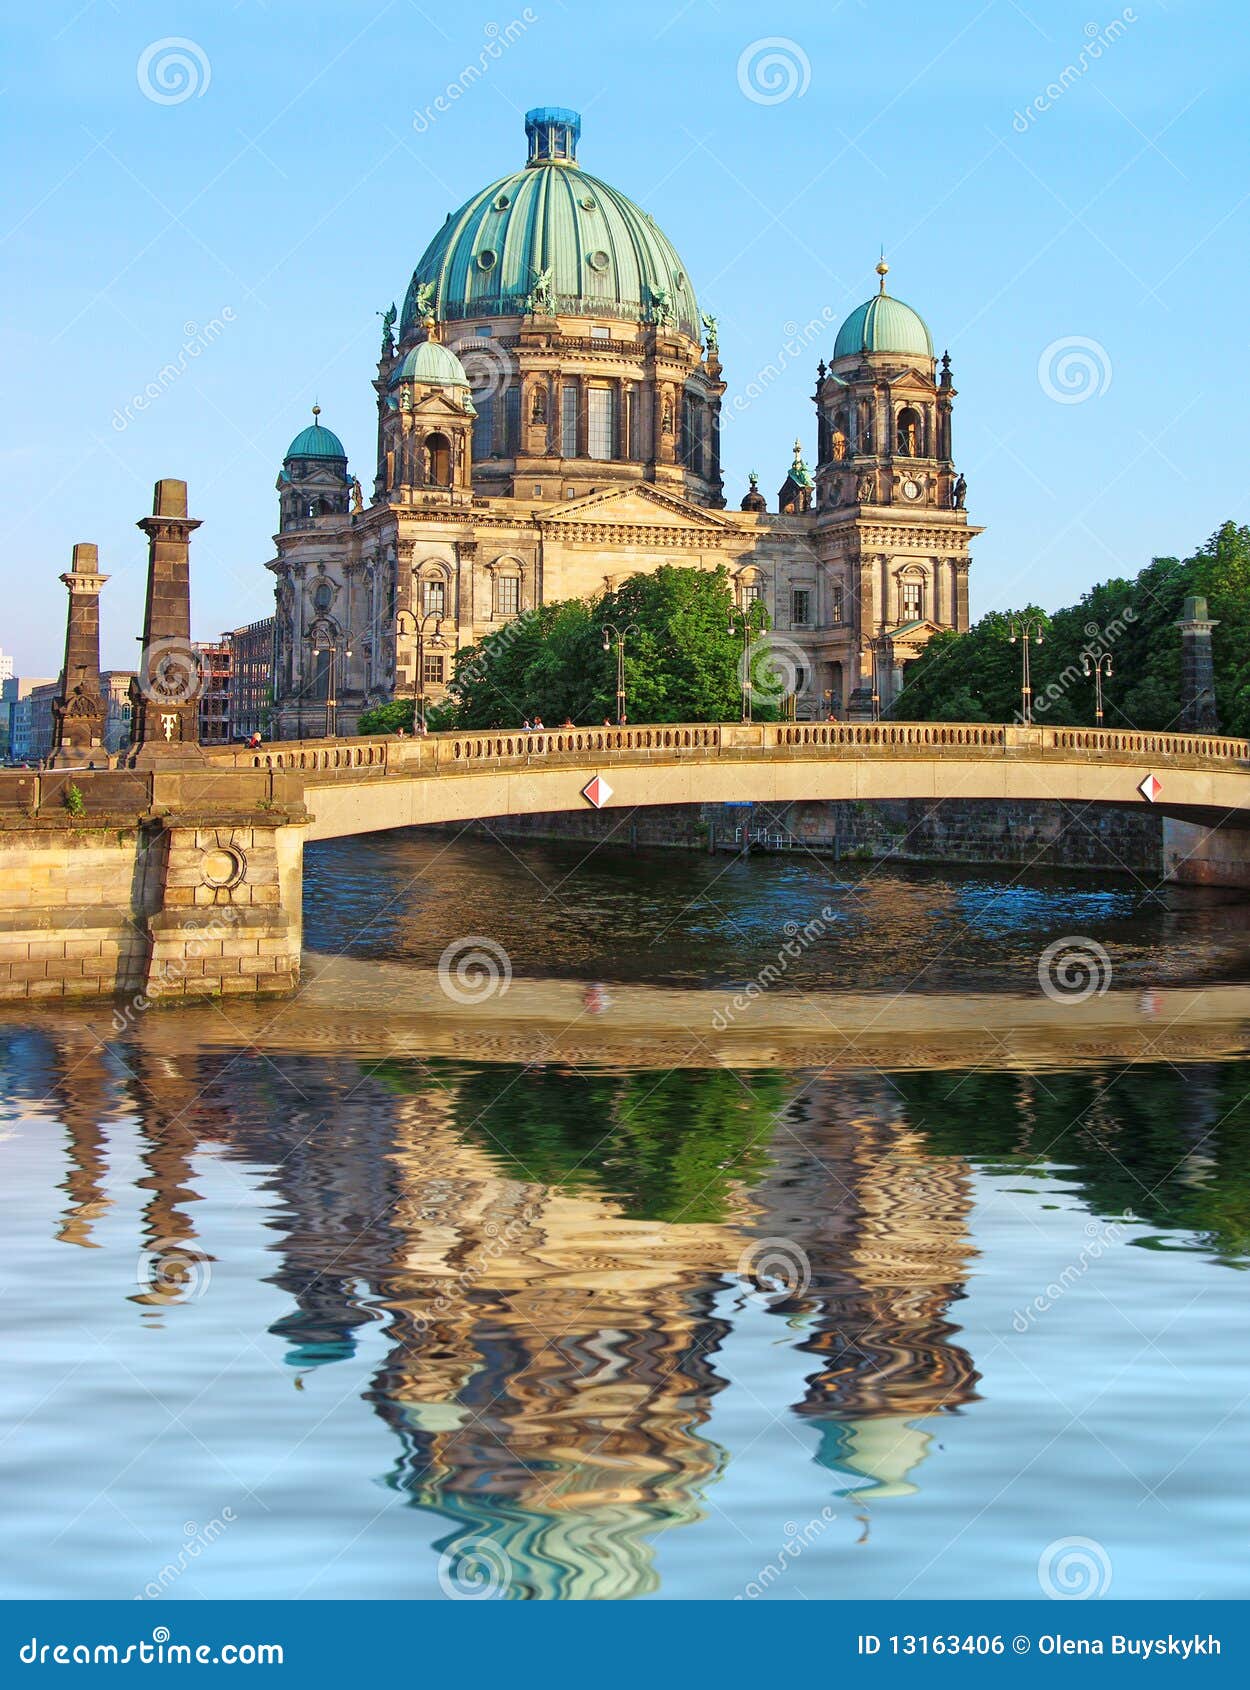 berlin cathedral (berliner dom), germany